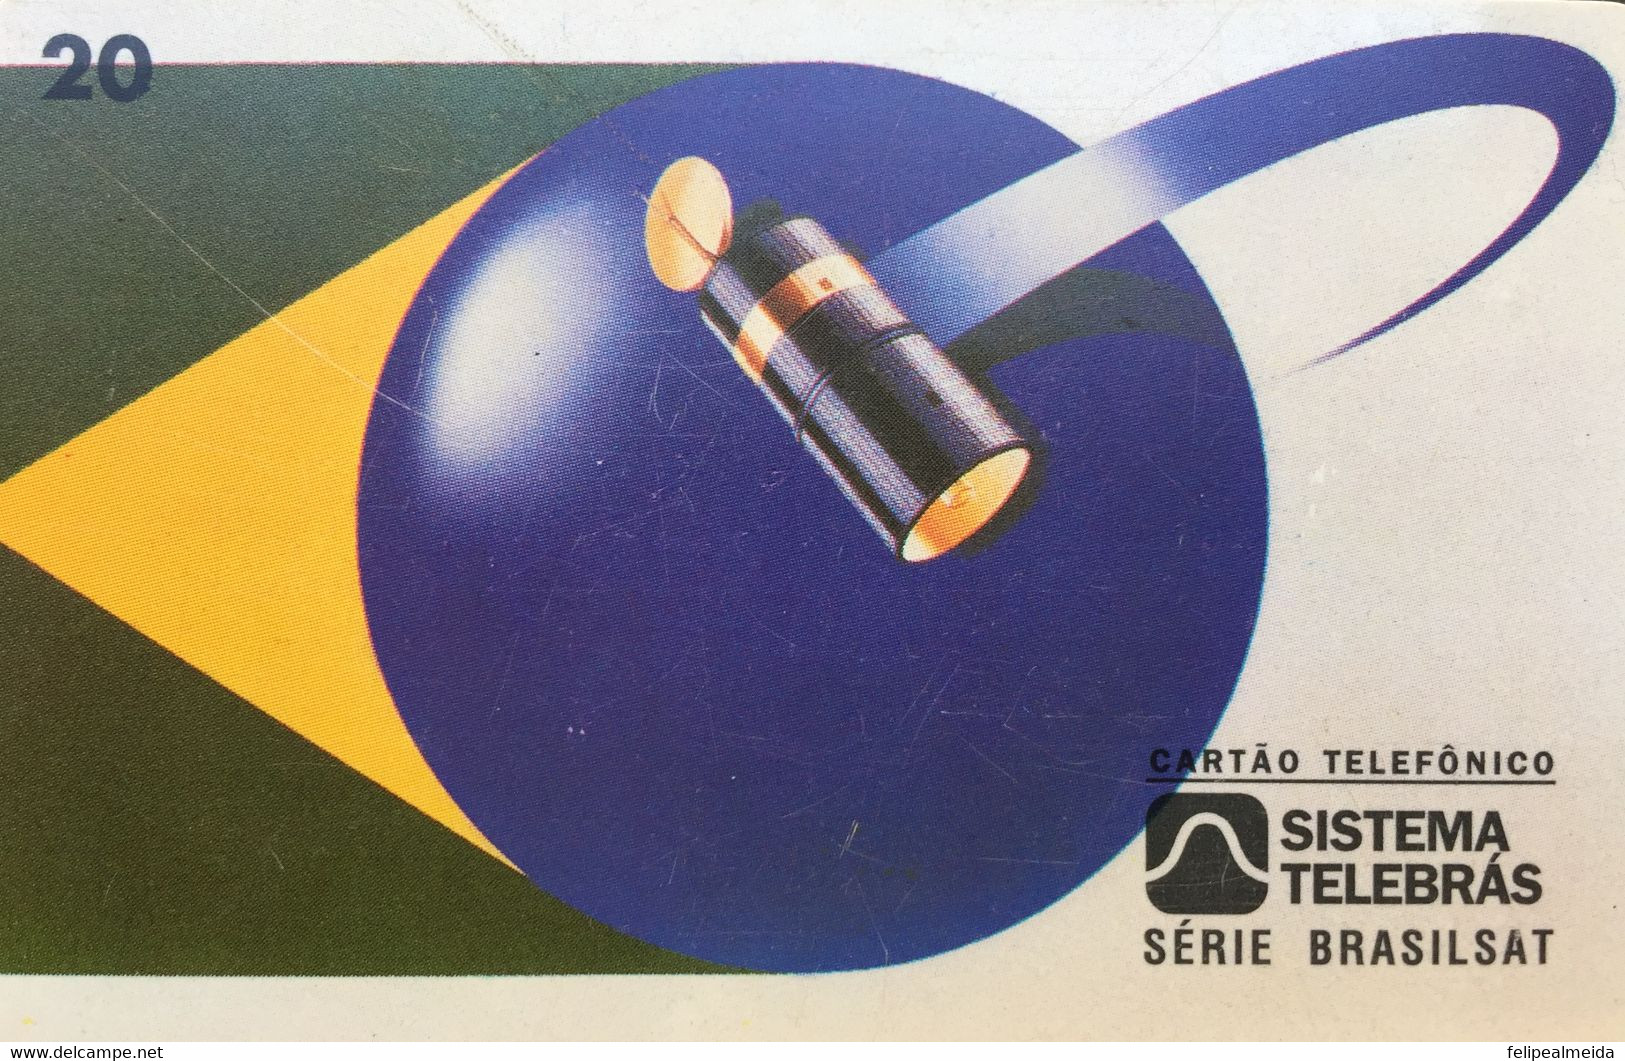 Phone Card Made By Telebras In 1997 - Series Brasilsat - On February 28, 1994, Brazil Launched The Second Generation Of - Espace